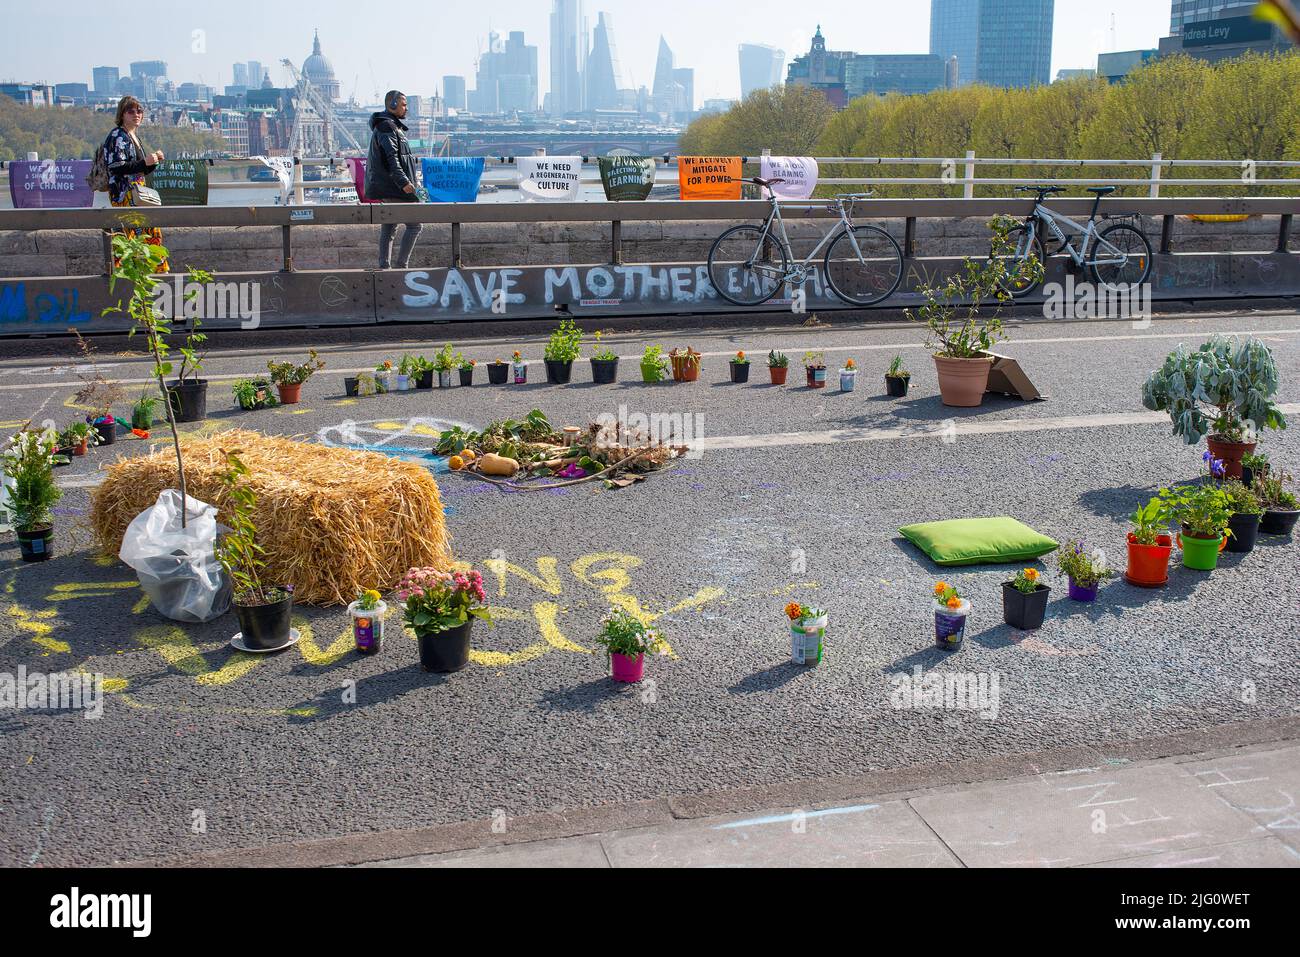 Waterloo Bridge, London, covered in colorful slogans by supporters of the Extinction Rebellion campaign in protest of world ecological climate change. Stock Photo